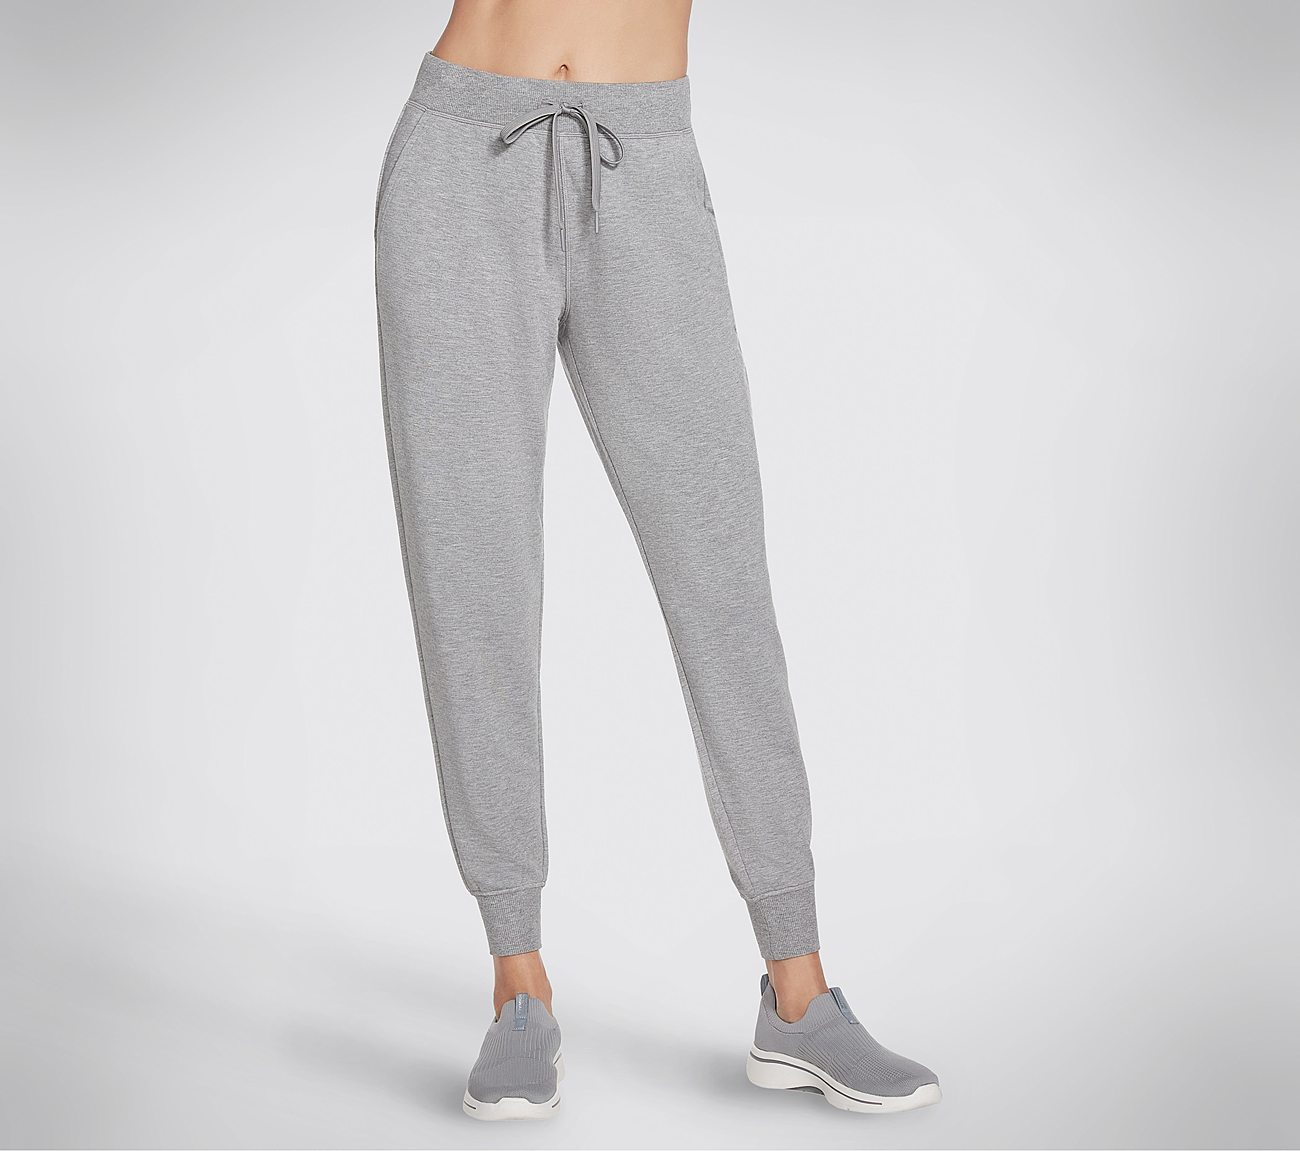 RESTFUL JOGGER, LIGHT GREY Apparel Lateral View